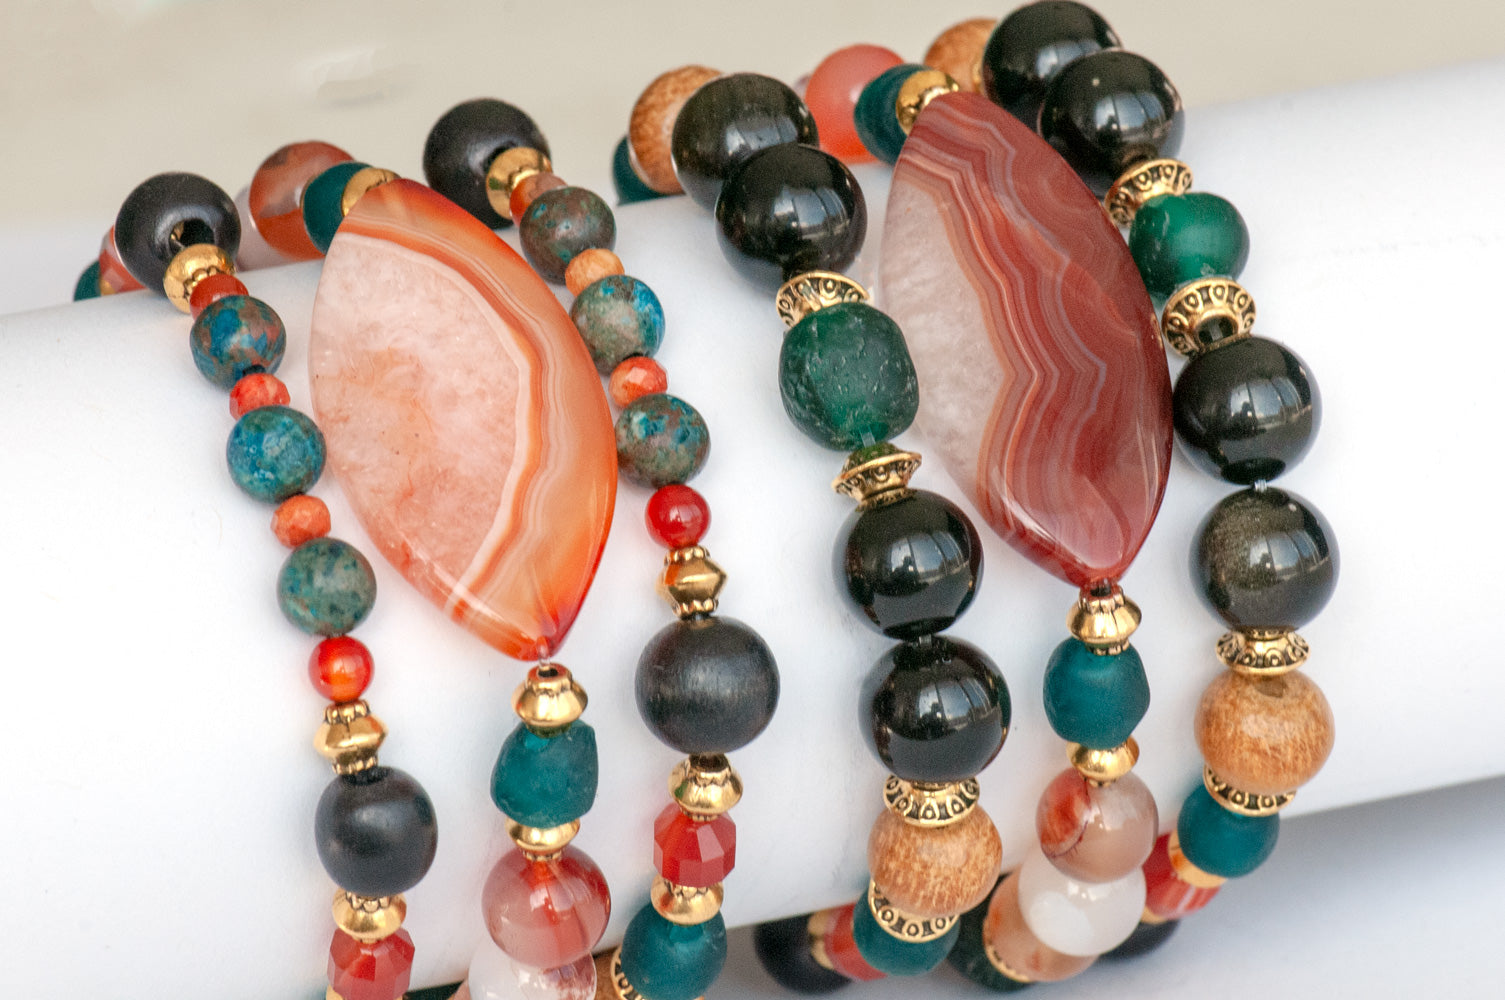 Handmade Voyage to Nairobi bracelet set featuring marquis-shaped Carnelian, red Sardonyx, dark teal recycled glass beads, and antique gold-plated spacers, inspired by African heritage.